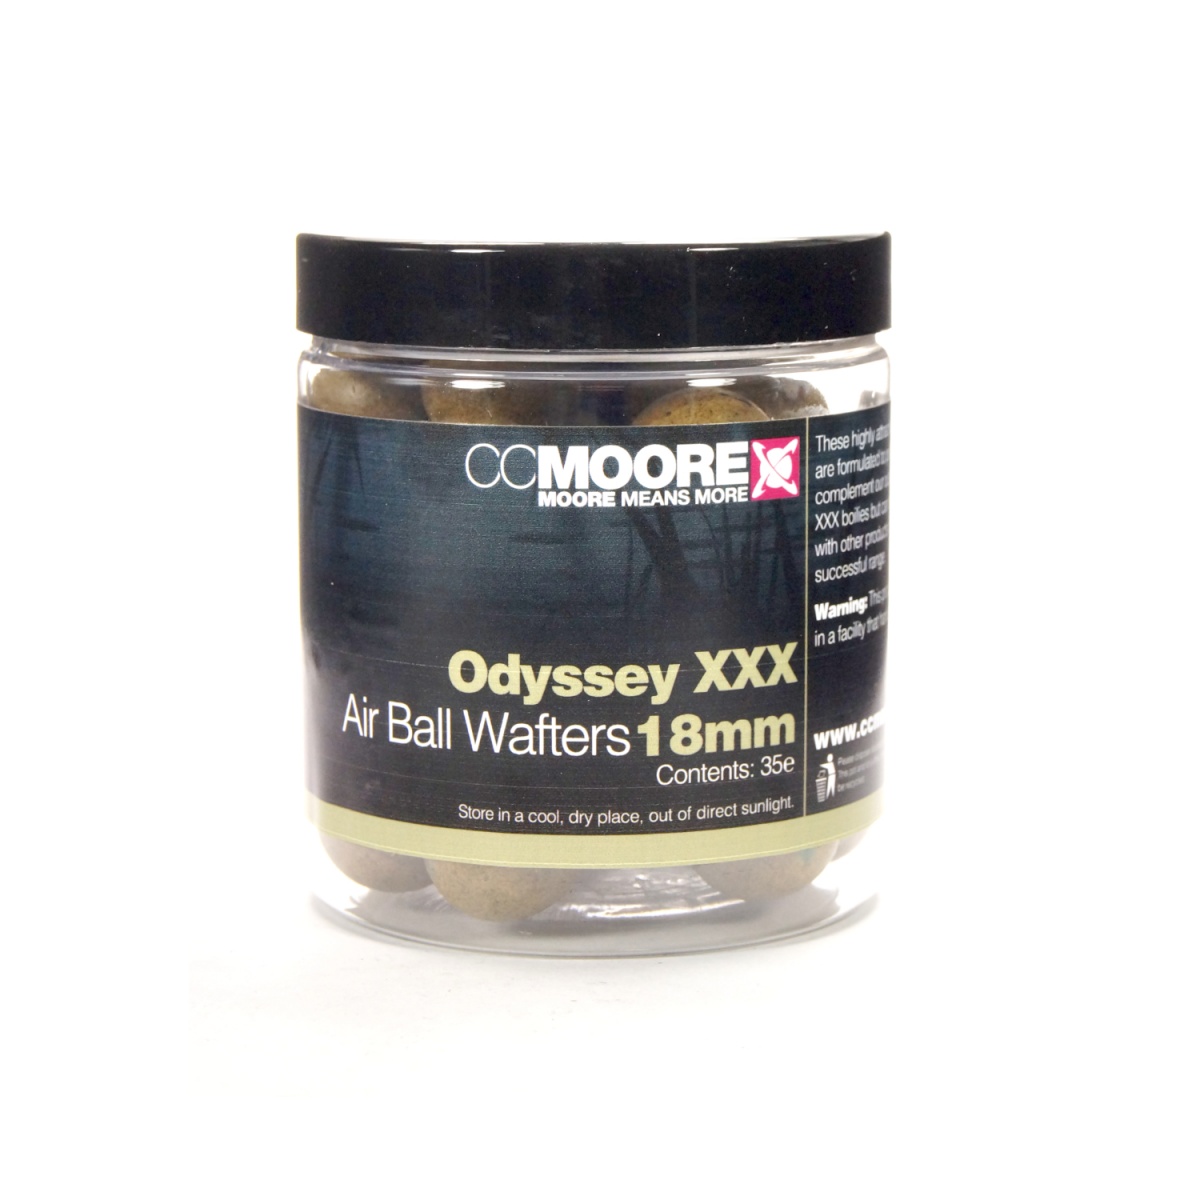 NEW CcMoore Air Ball Wafters Odyssey XXX 18 mm rozmiar